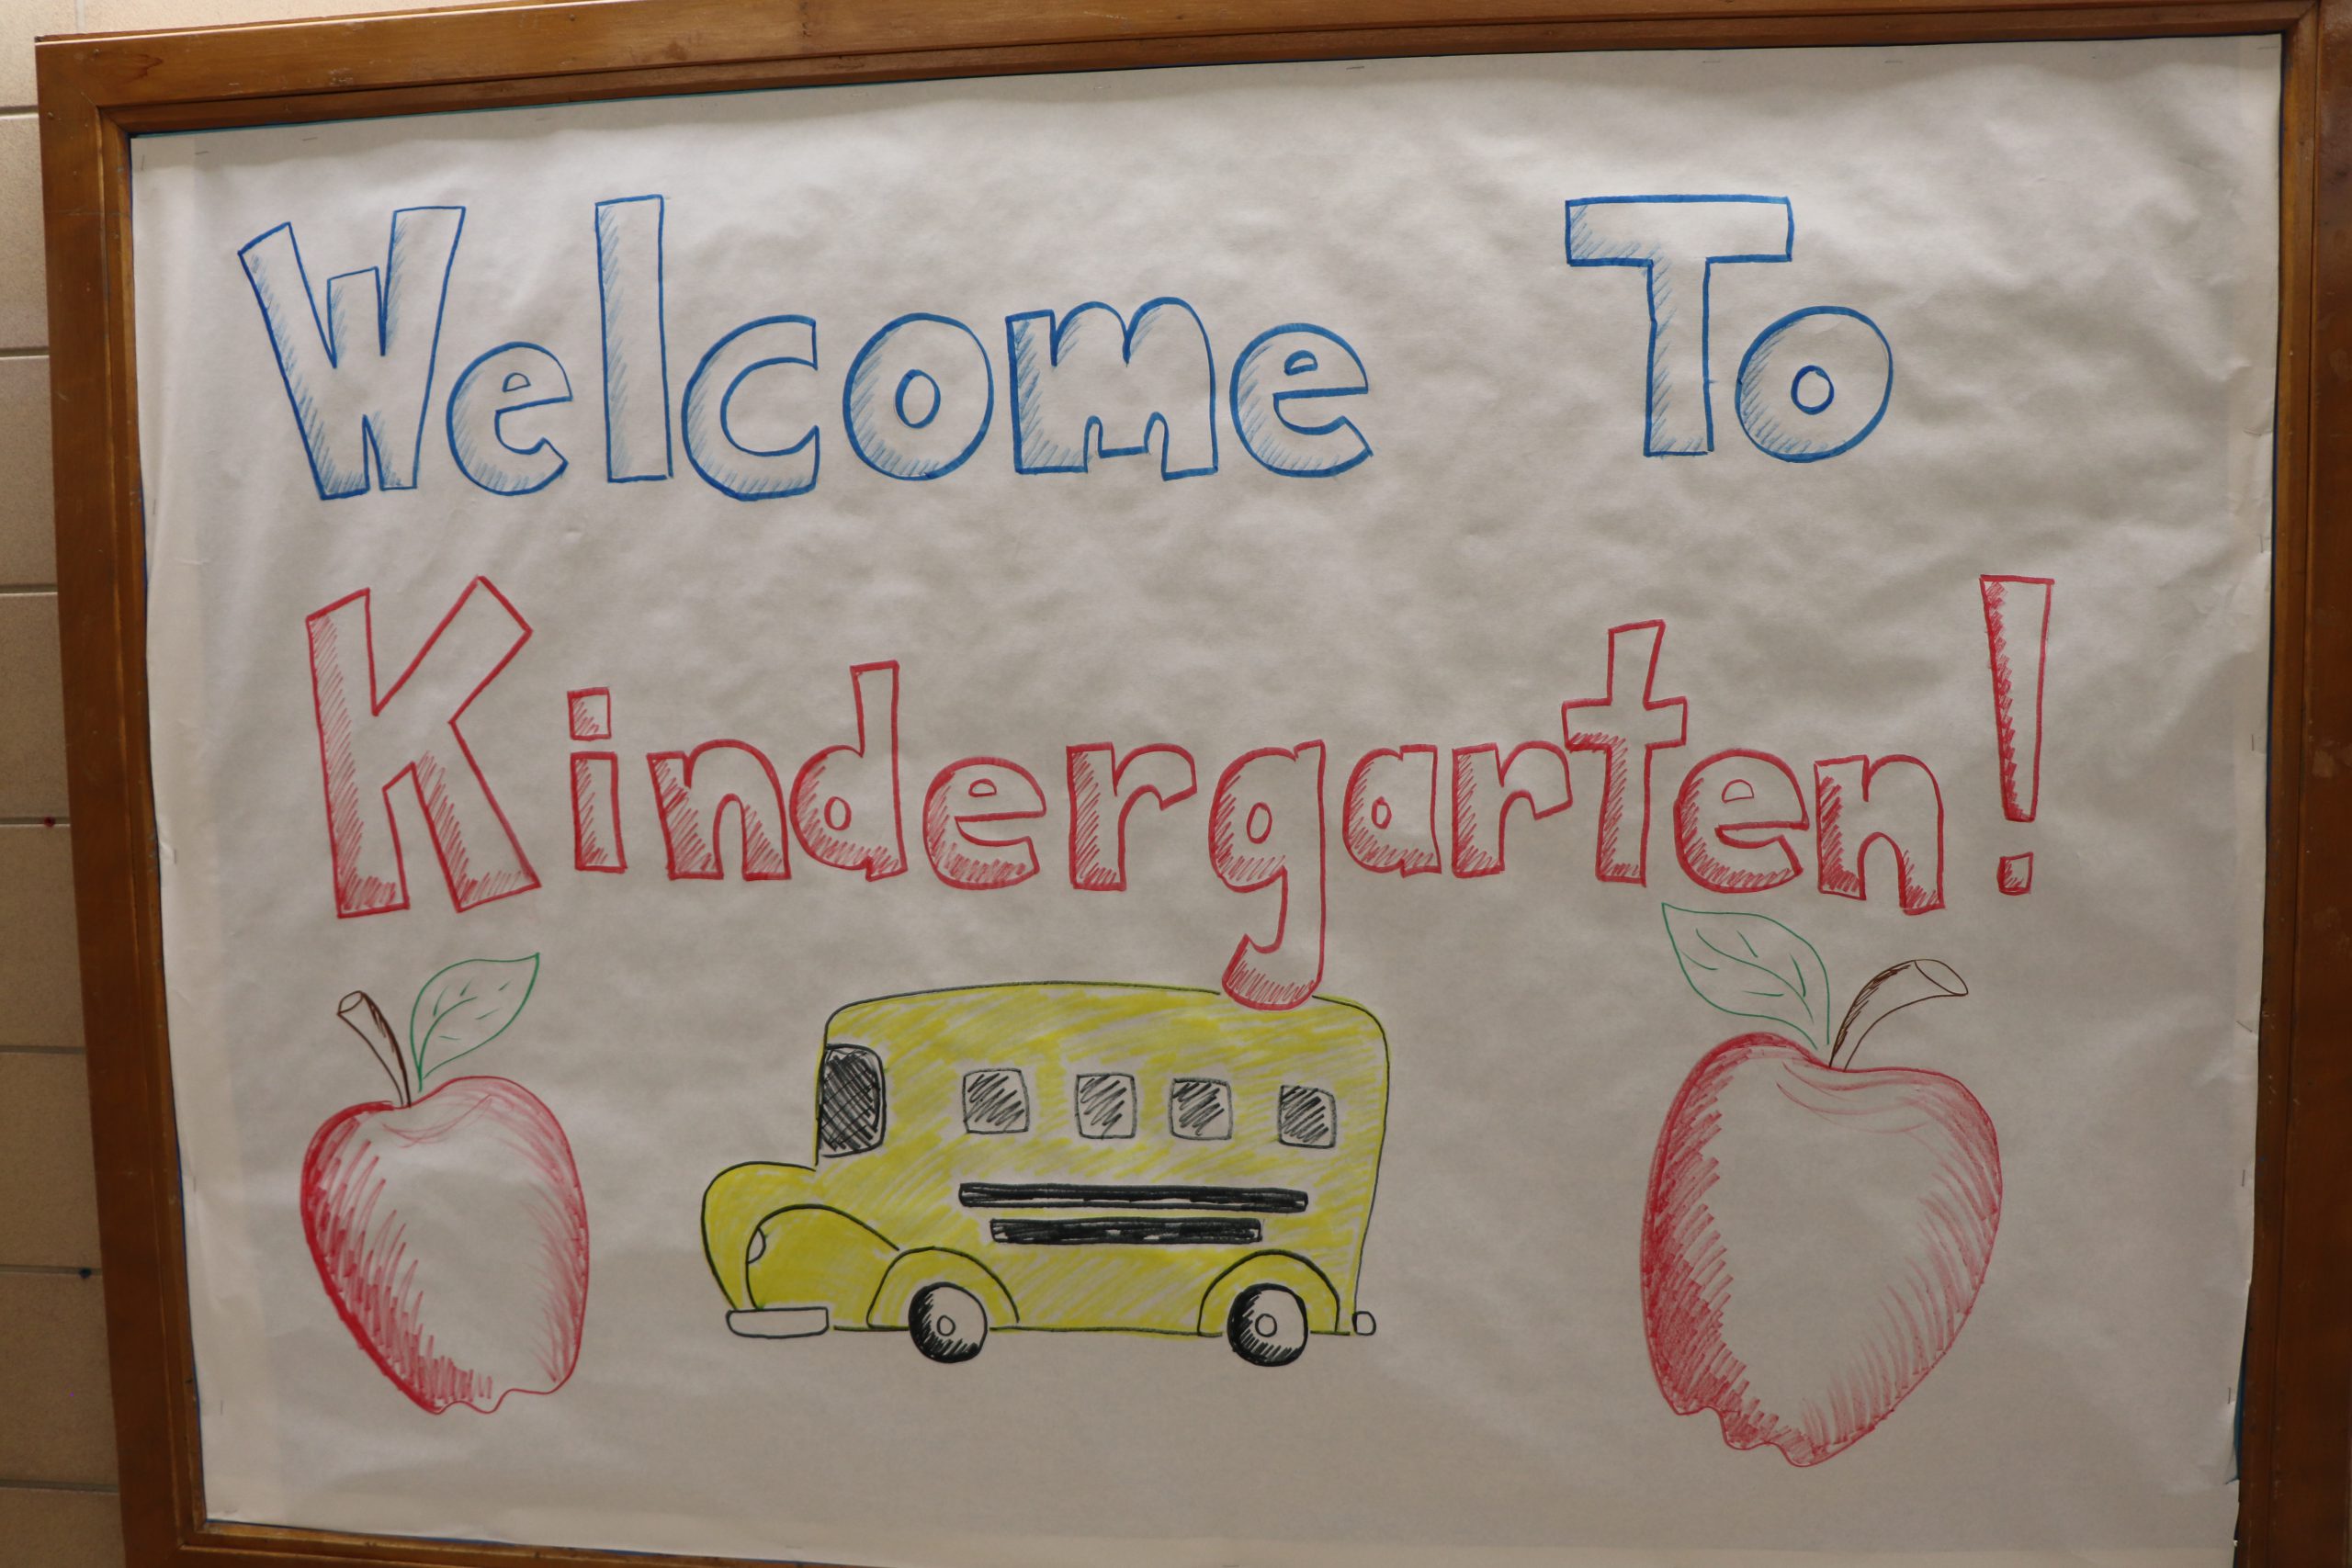 Sign that says "Welcome to Kindergarten" with an image of a school bus and two apples.